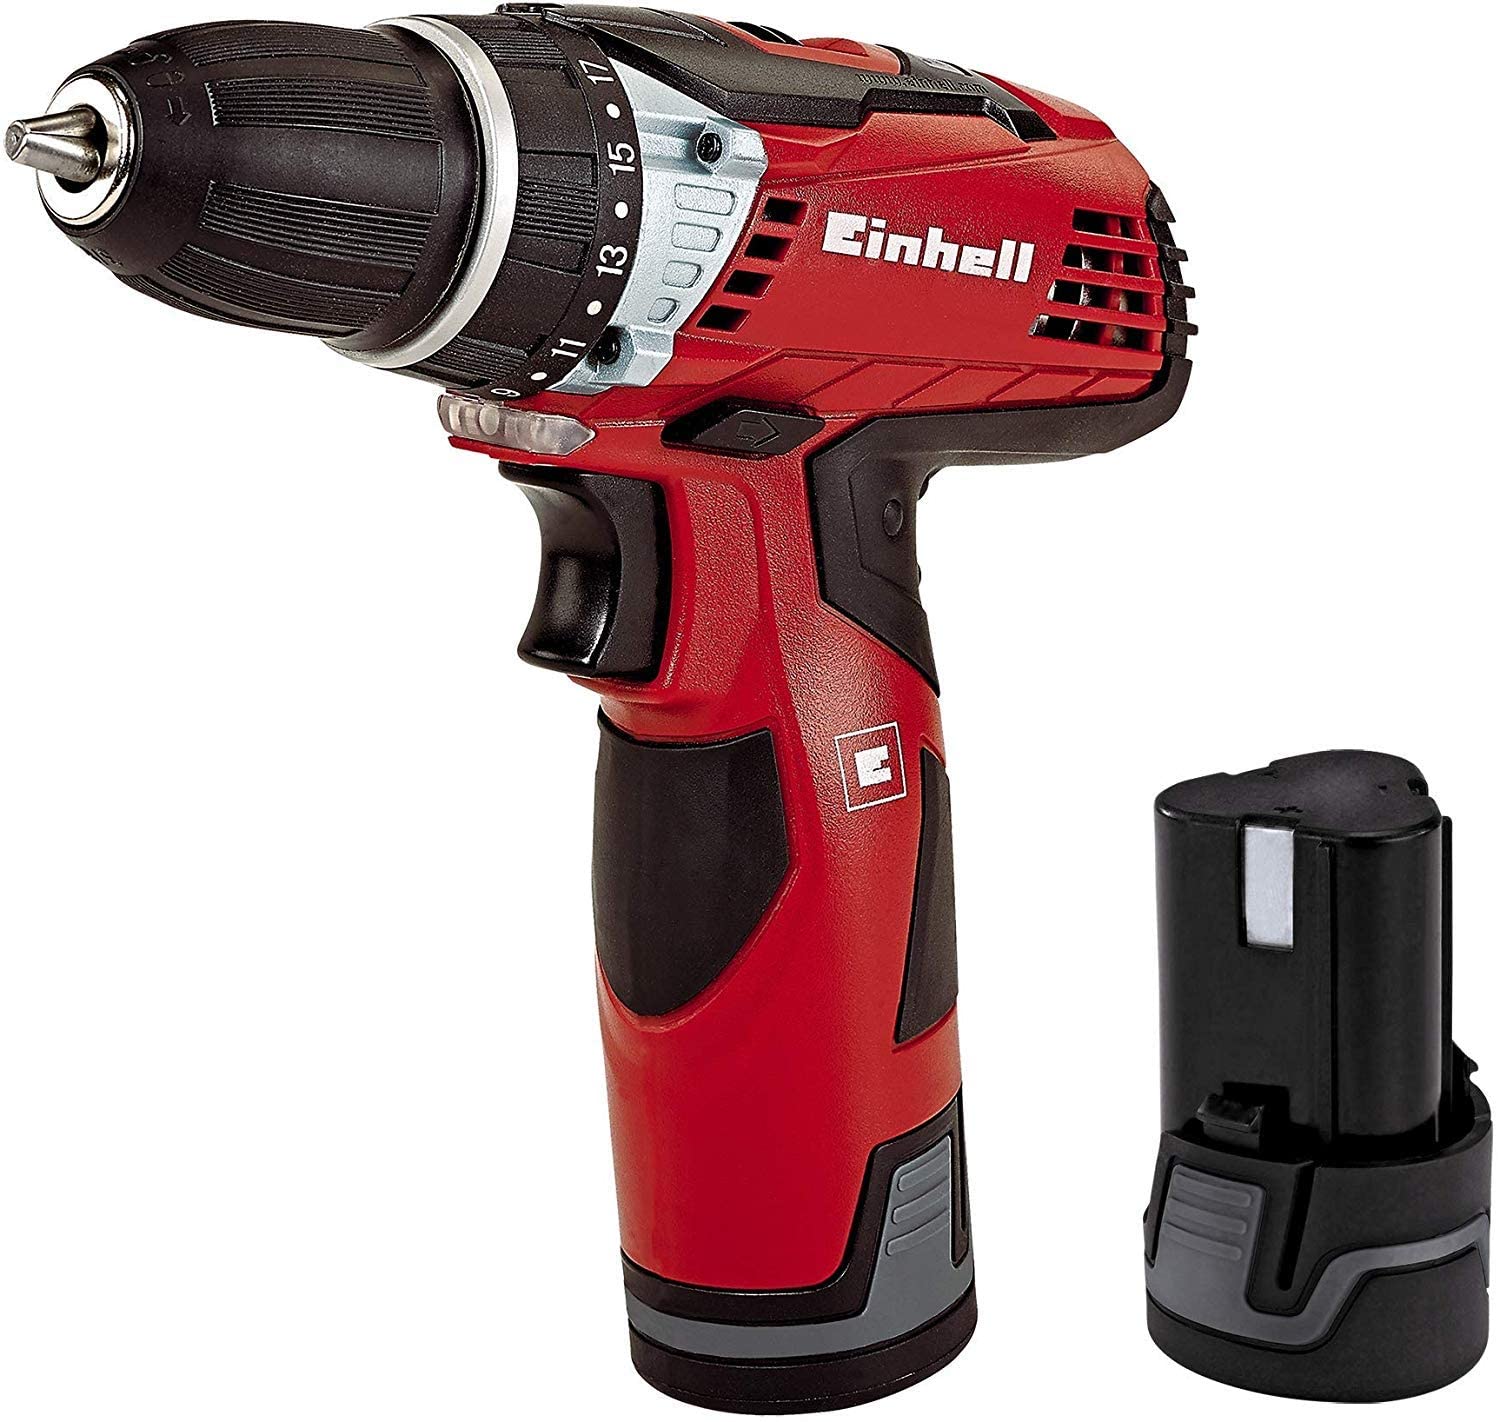 Einhell TE-CD 12 Li Cordless power Combi Drill 12V Kit, with Two Batteries